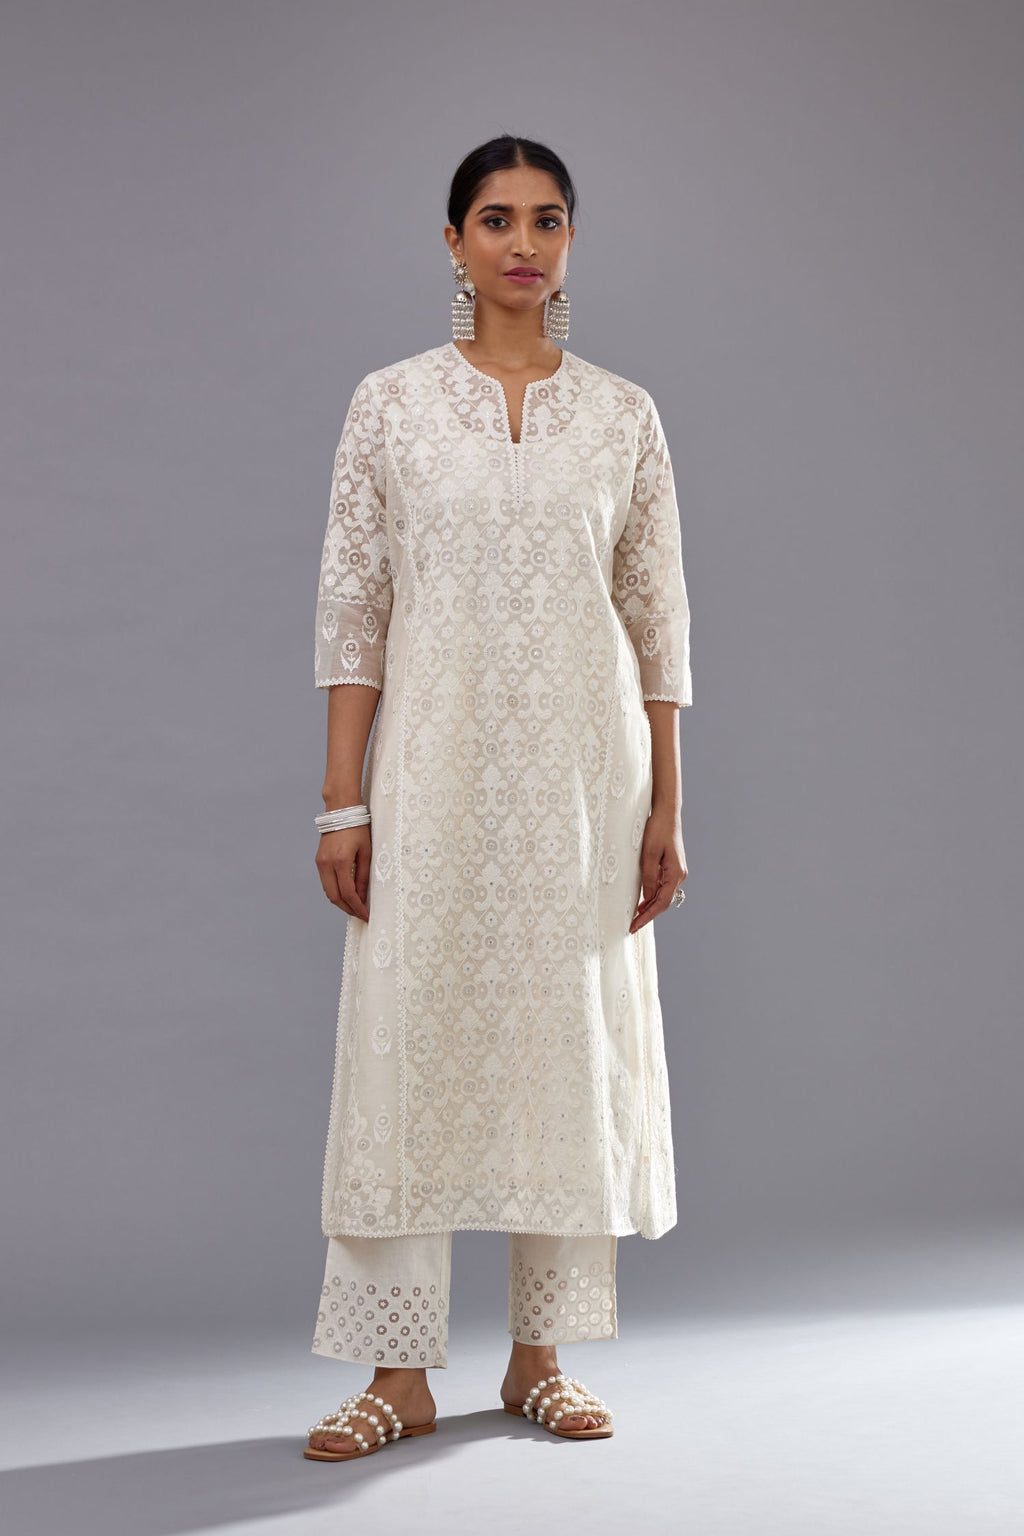 Off white silk chanderi straight kurta set with appliqué trellis jaal in center panel and small assorted flowers embroidery at side panells.